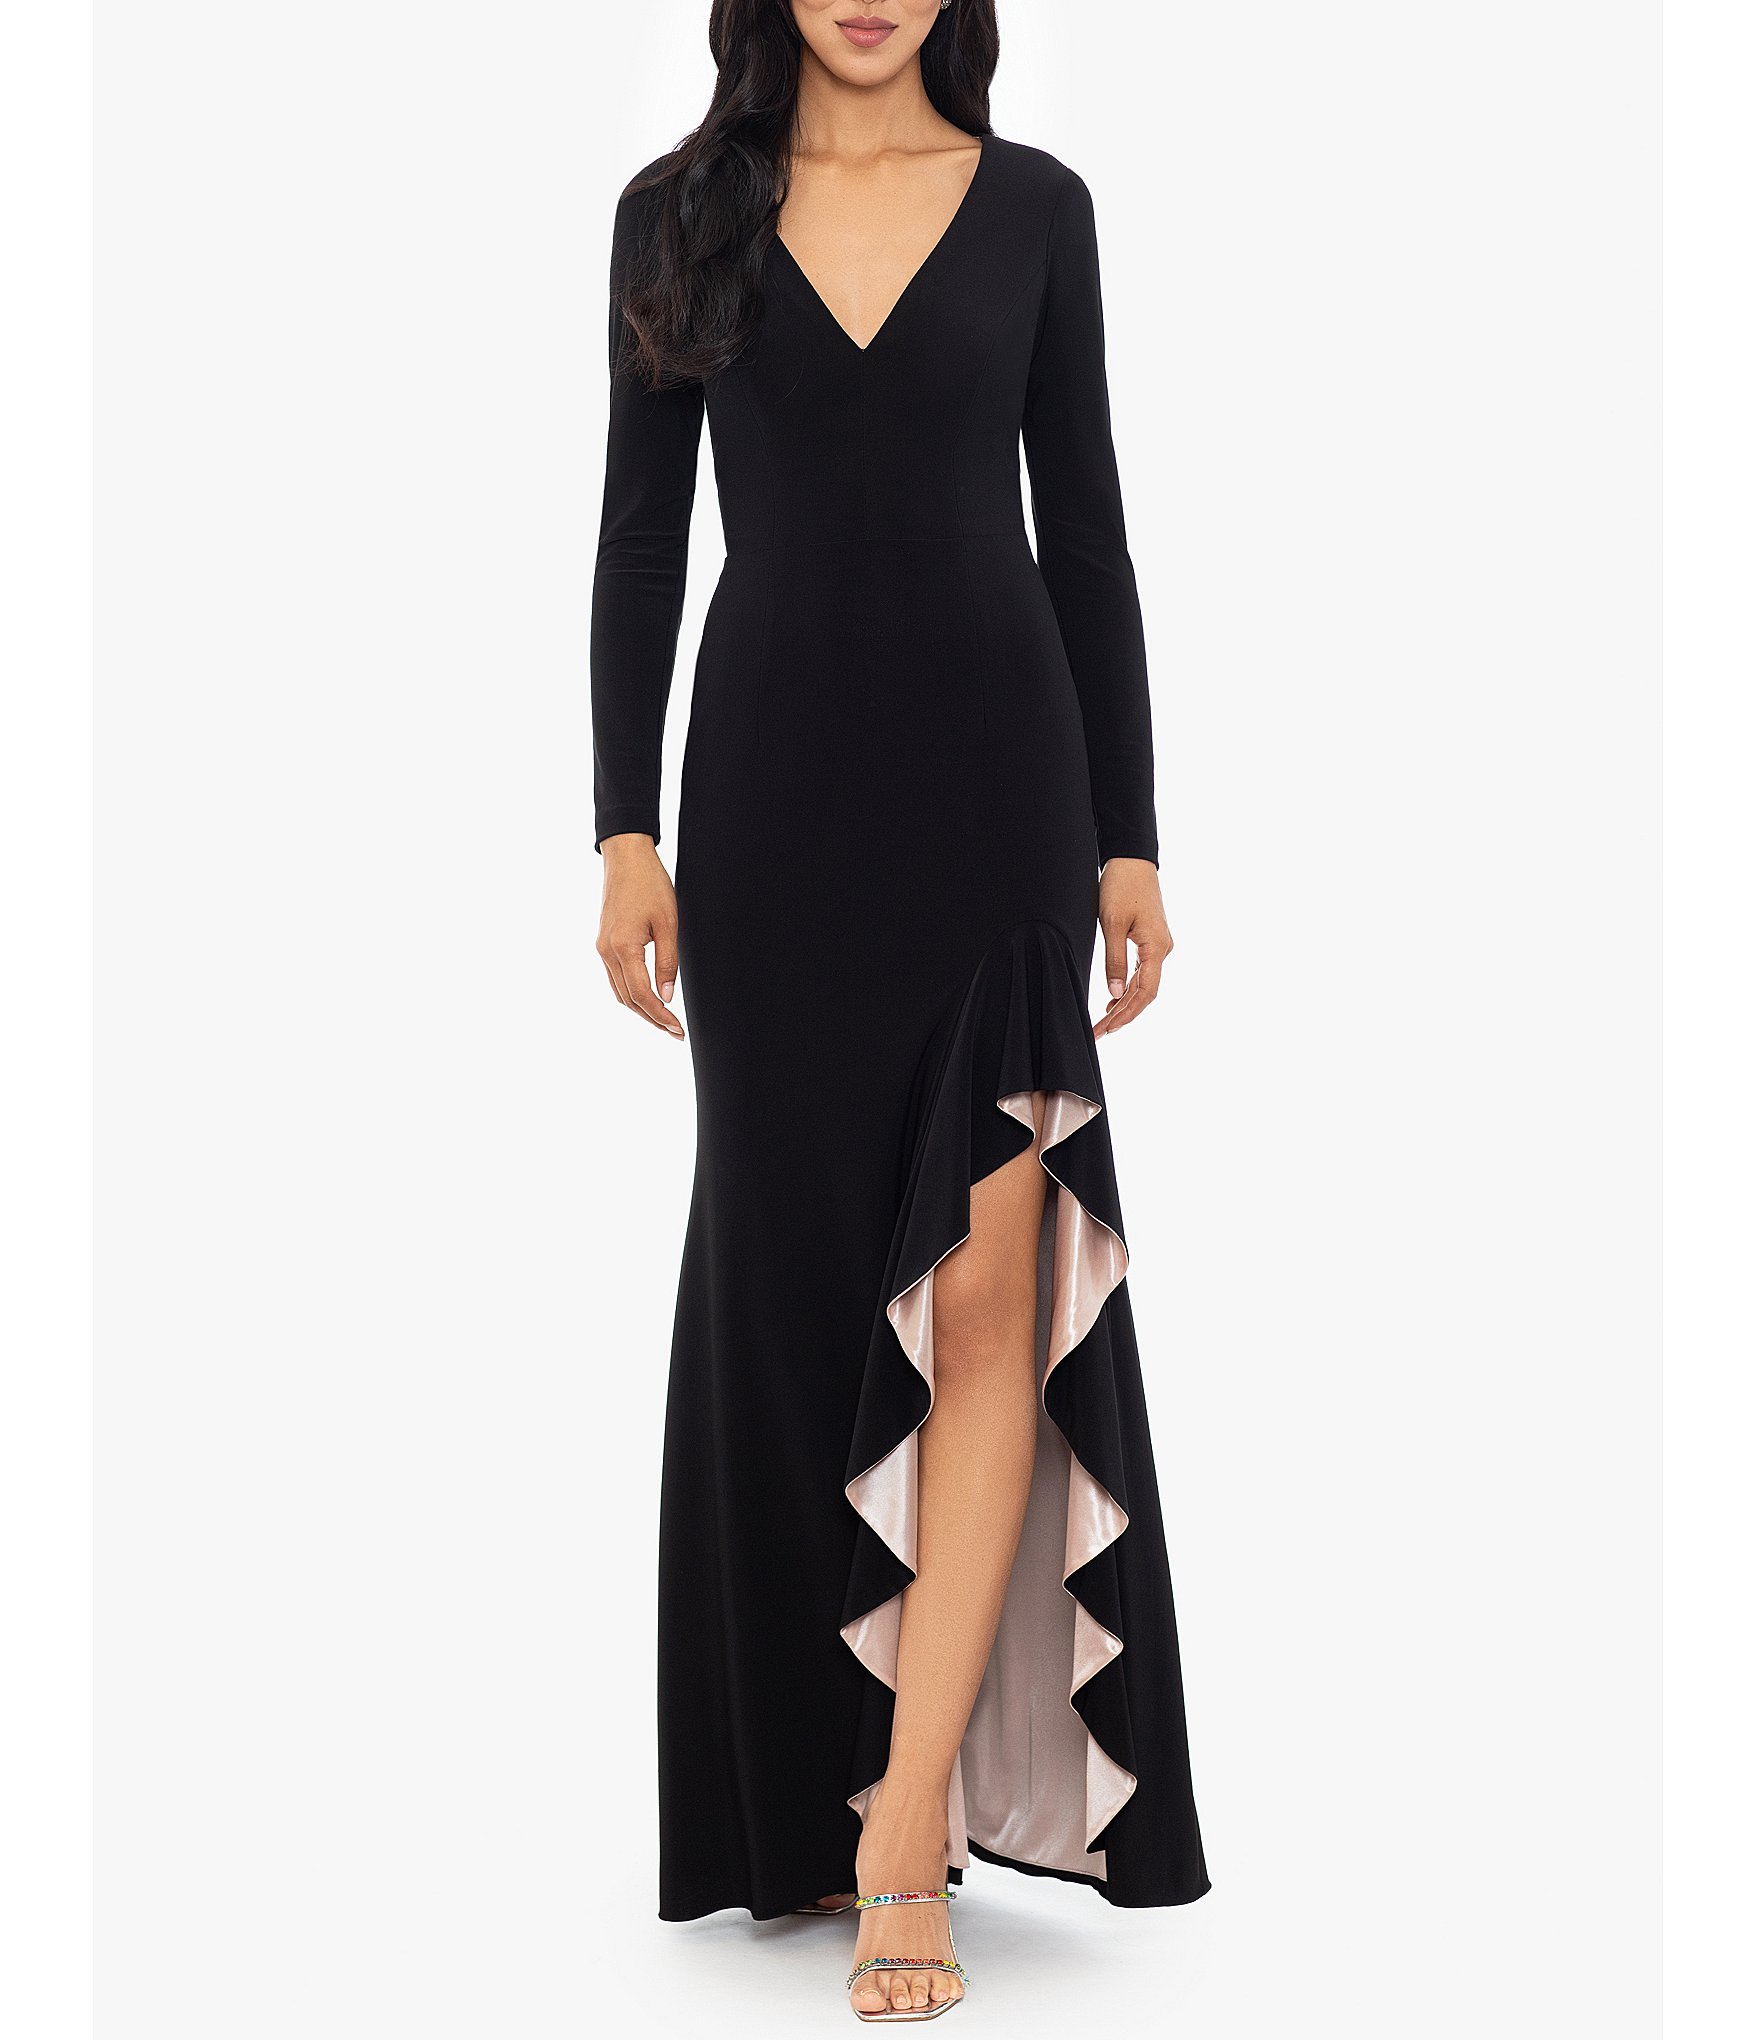 https://dimg.dillards.com/is/image/DillardsZoom/zoom/xscape-stretch-v-neck-long-sleeve-gown-with-cascading-ruffle/00000000_zi_203c0a82-ec56-493d-9e95-743be891821f.jpg